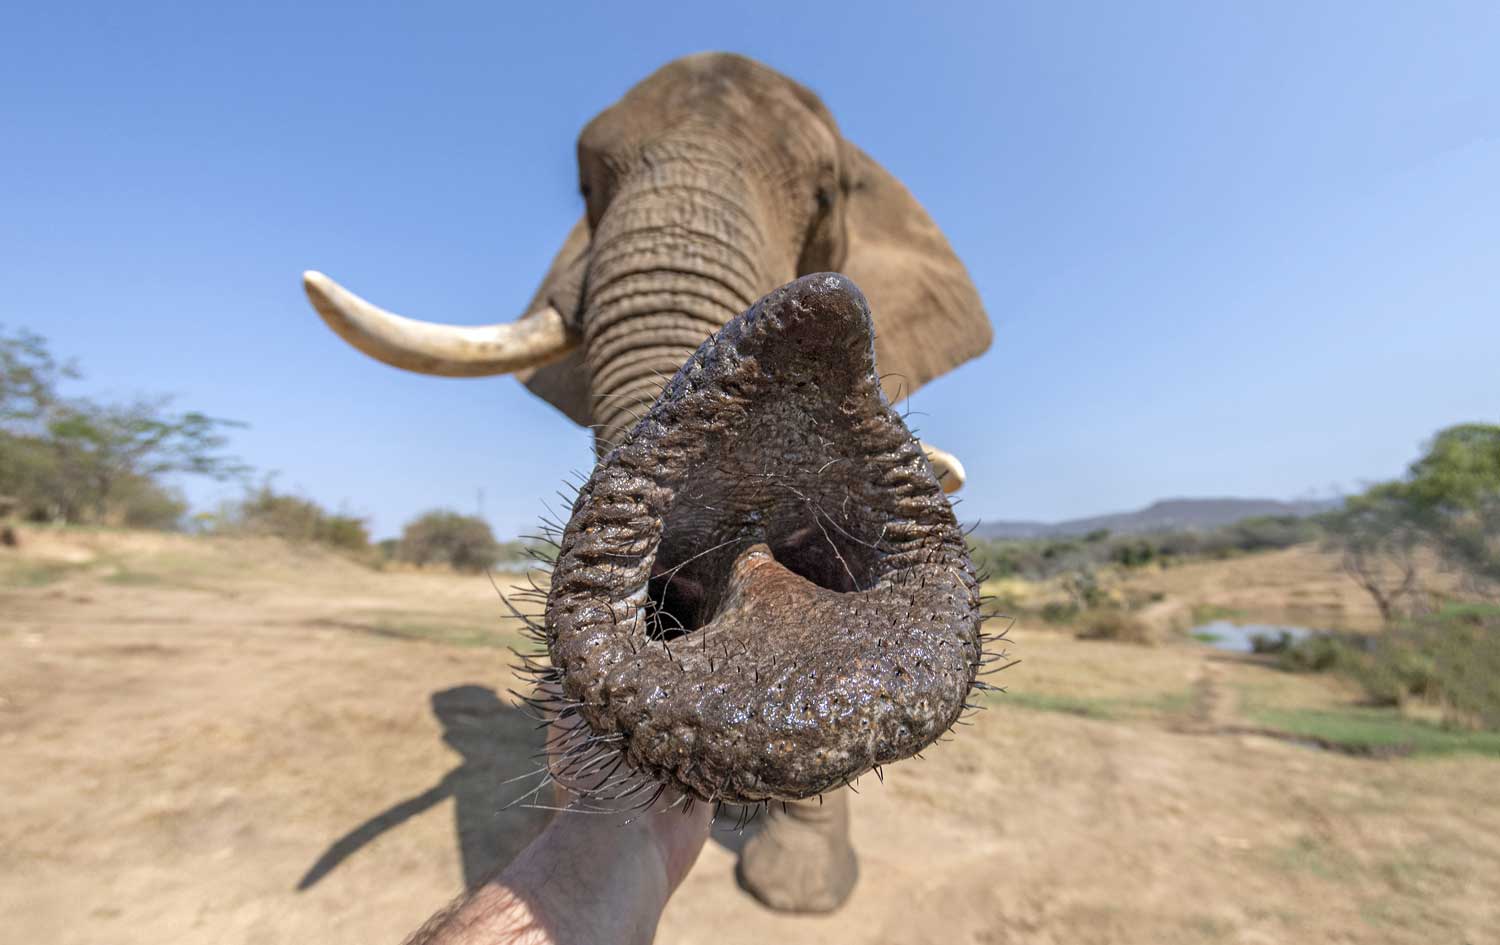 An elephant looks into the camera and points its trunk at the lens.